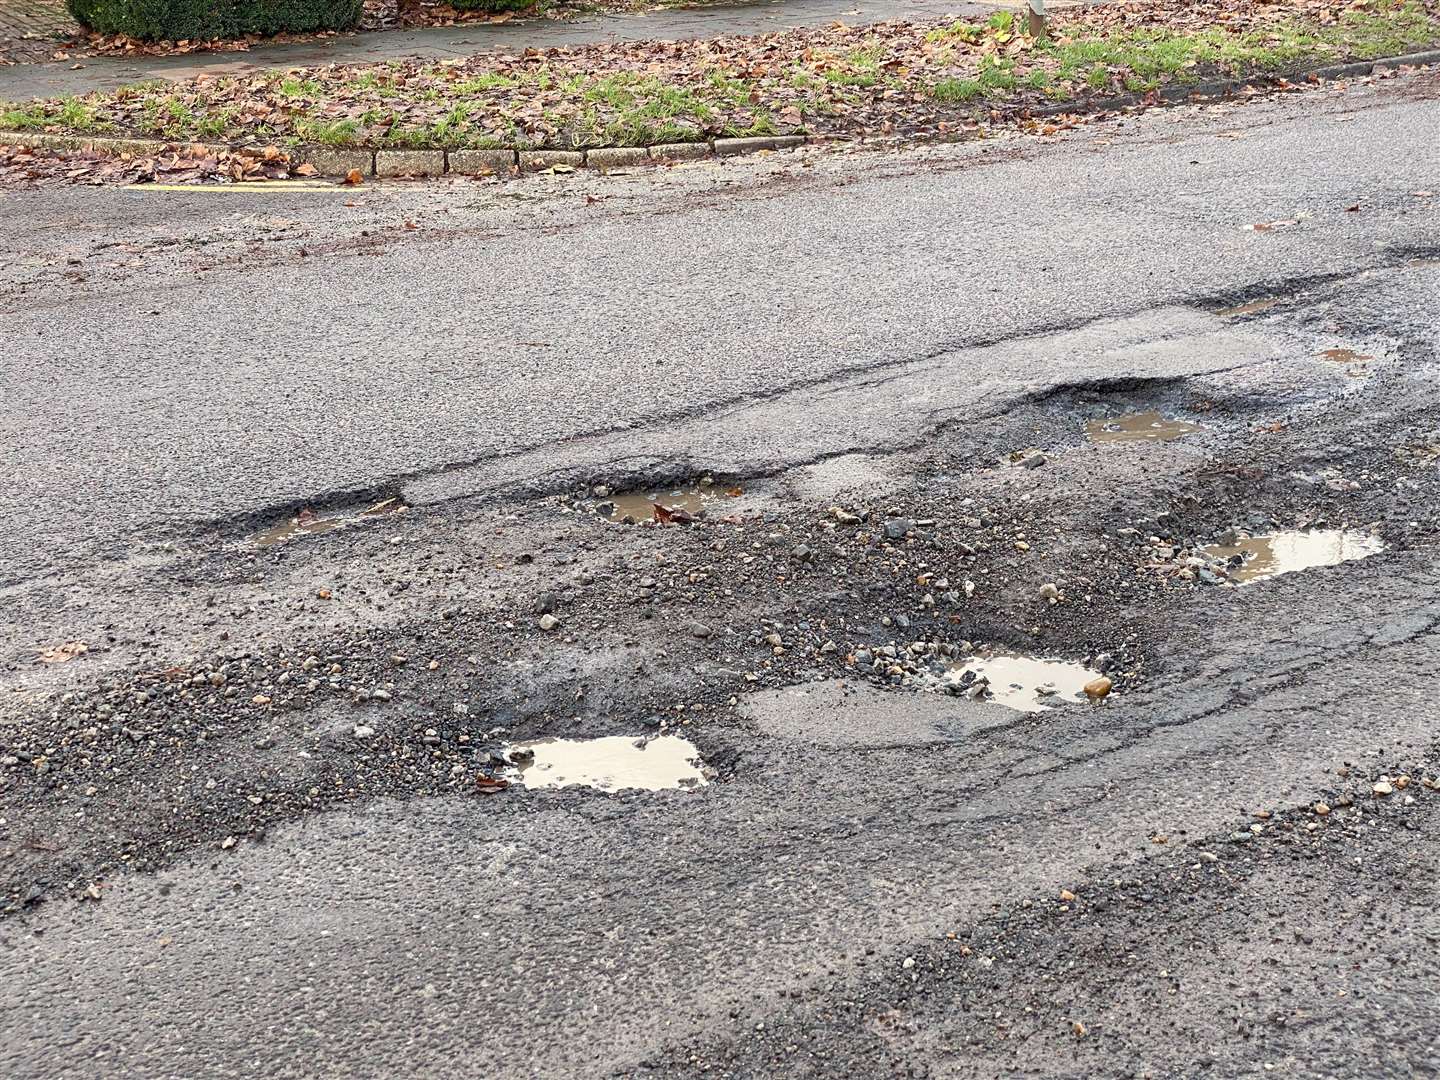 Residents say there is 100 yards of potholes in East Cross in Tenterden. Picture: Sue Ferguson (61605171)